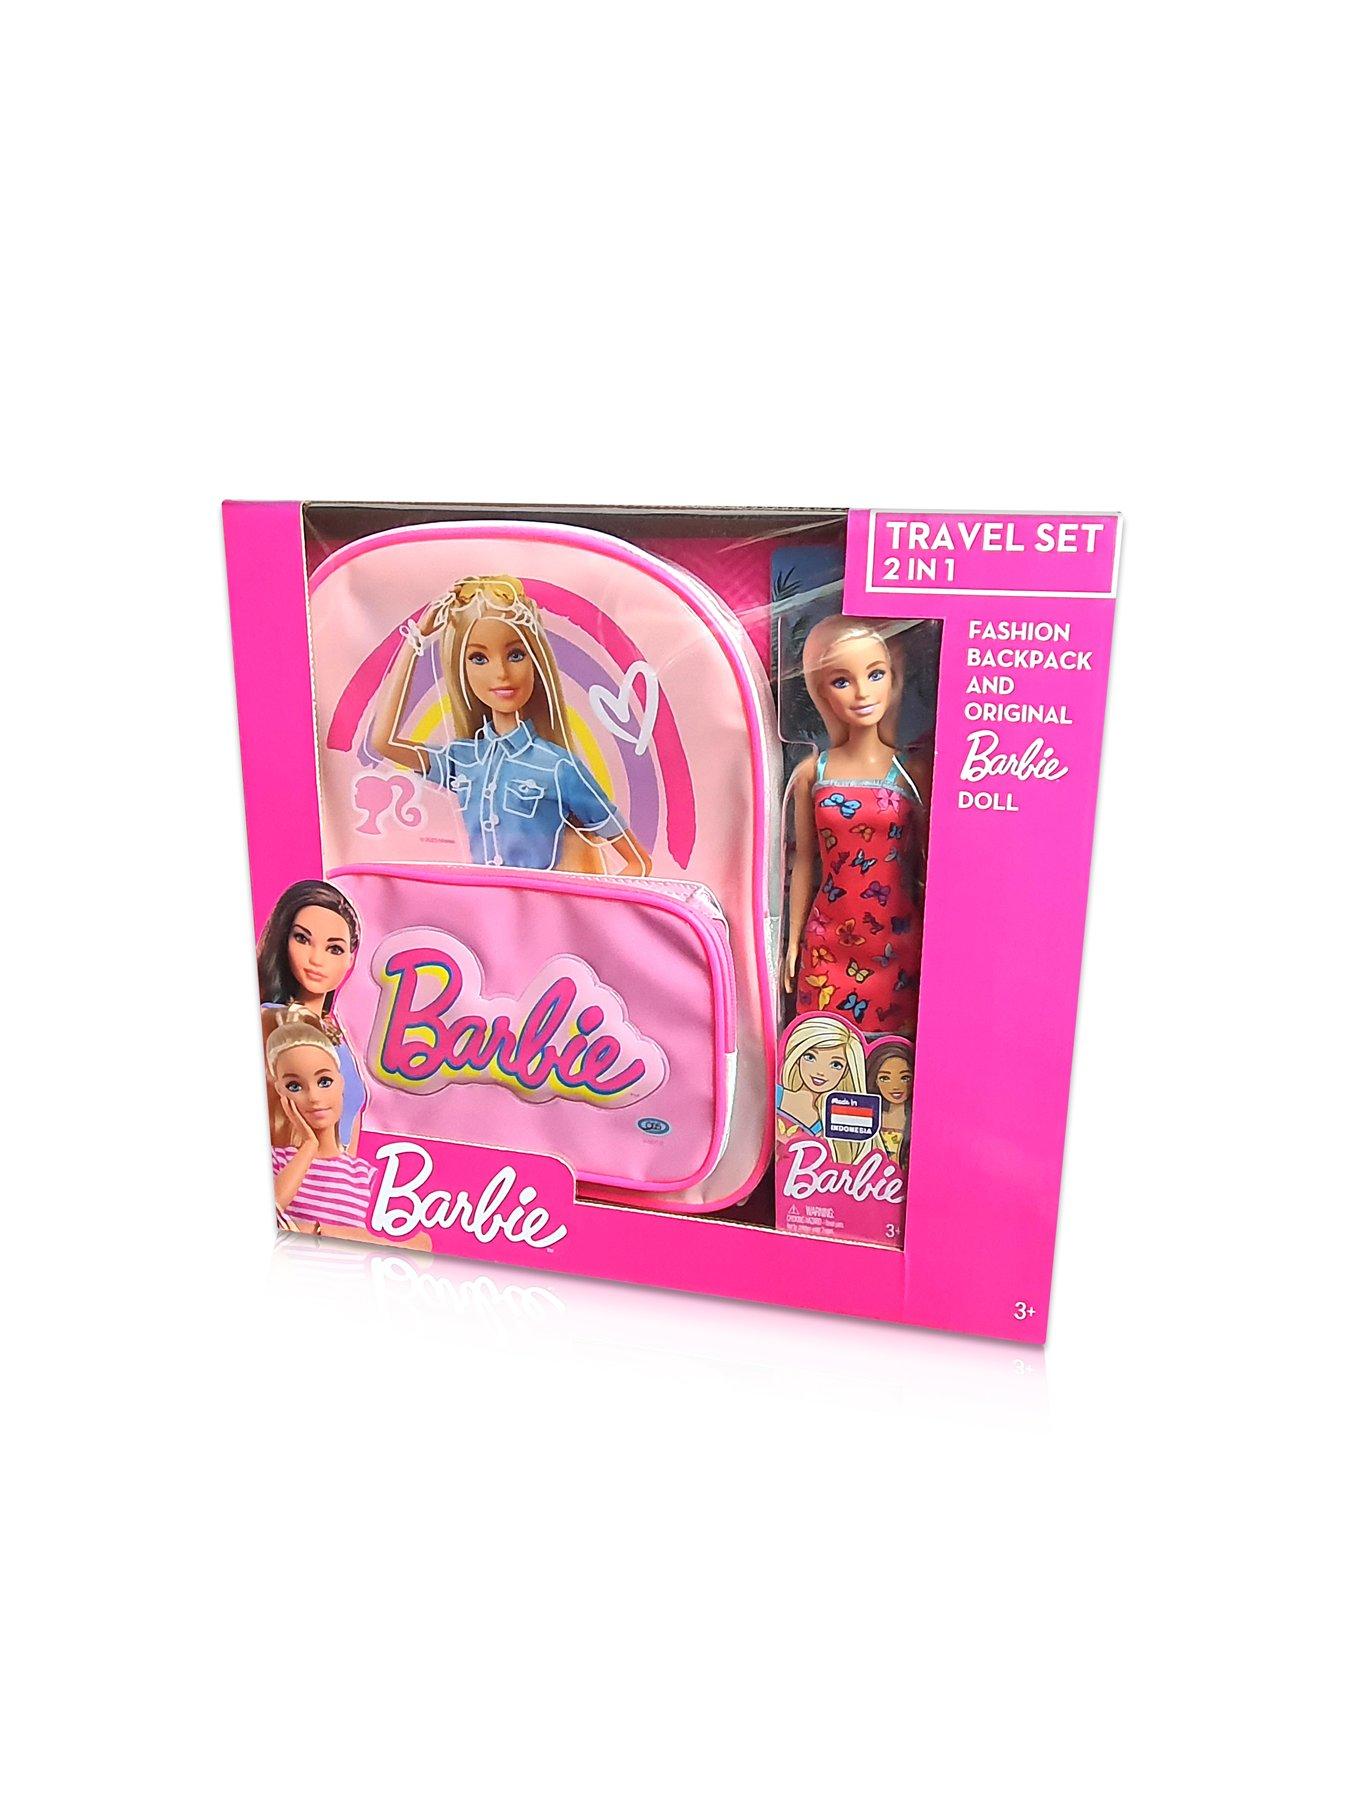 Barbie Travel Set Backpack and Doll